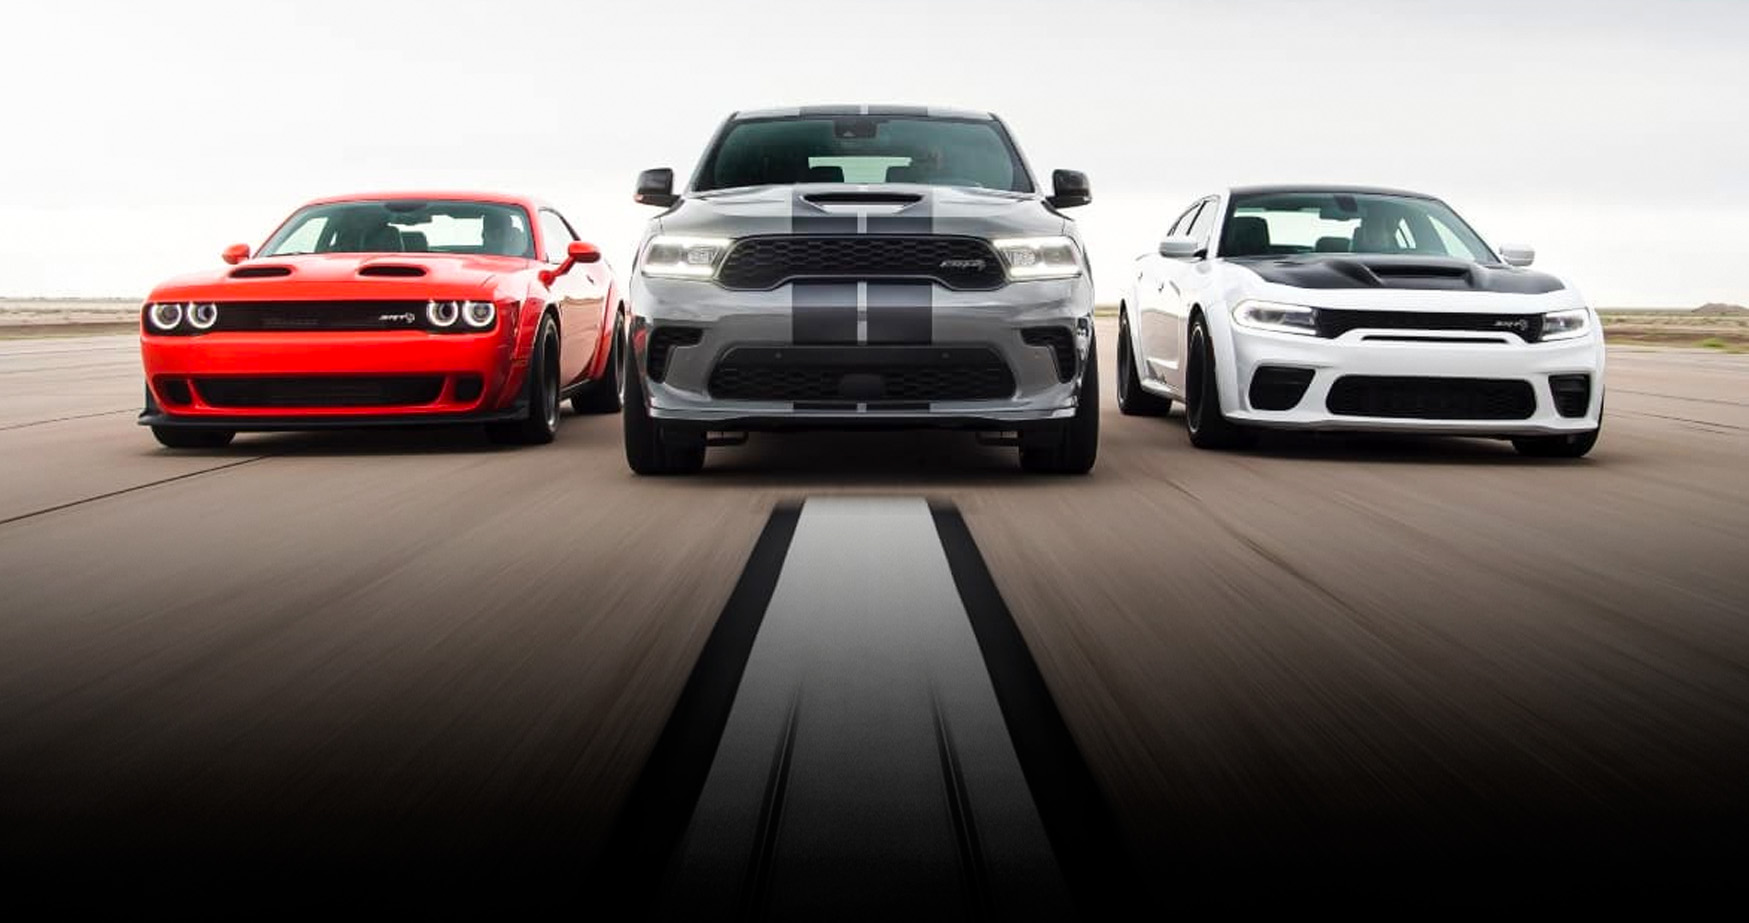 Shop for a new Dodge Charger hellcat from our Louisville Chrysler Dodge Jeep RAM. We have 2018 model Dodge Charger Hellcats for sale and various used cars on our lot.